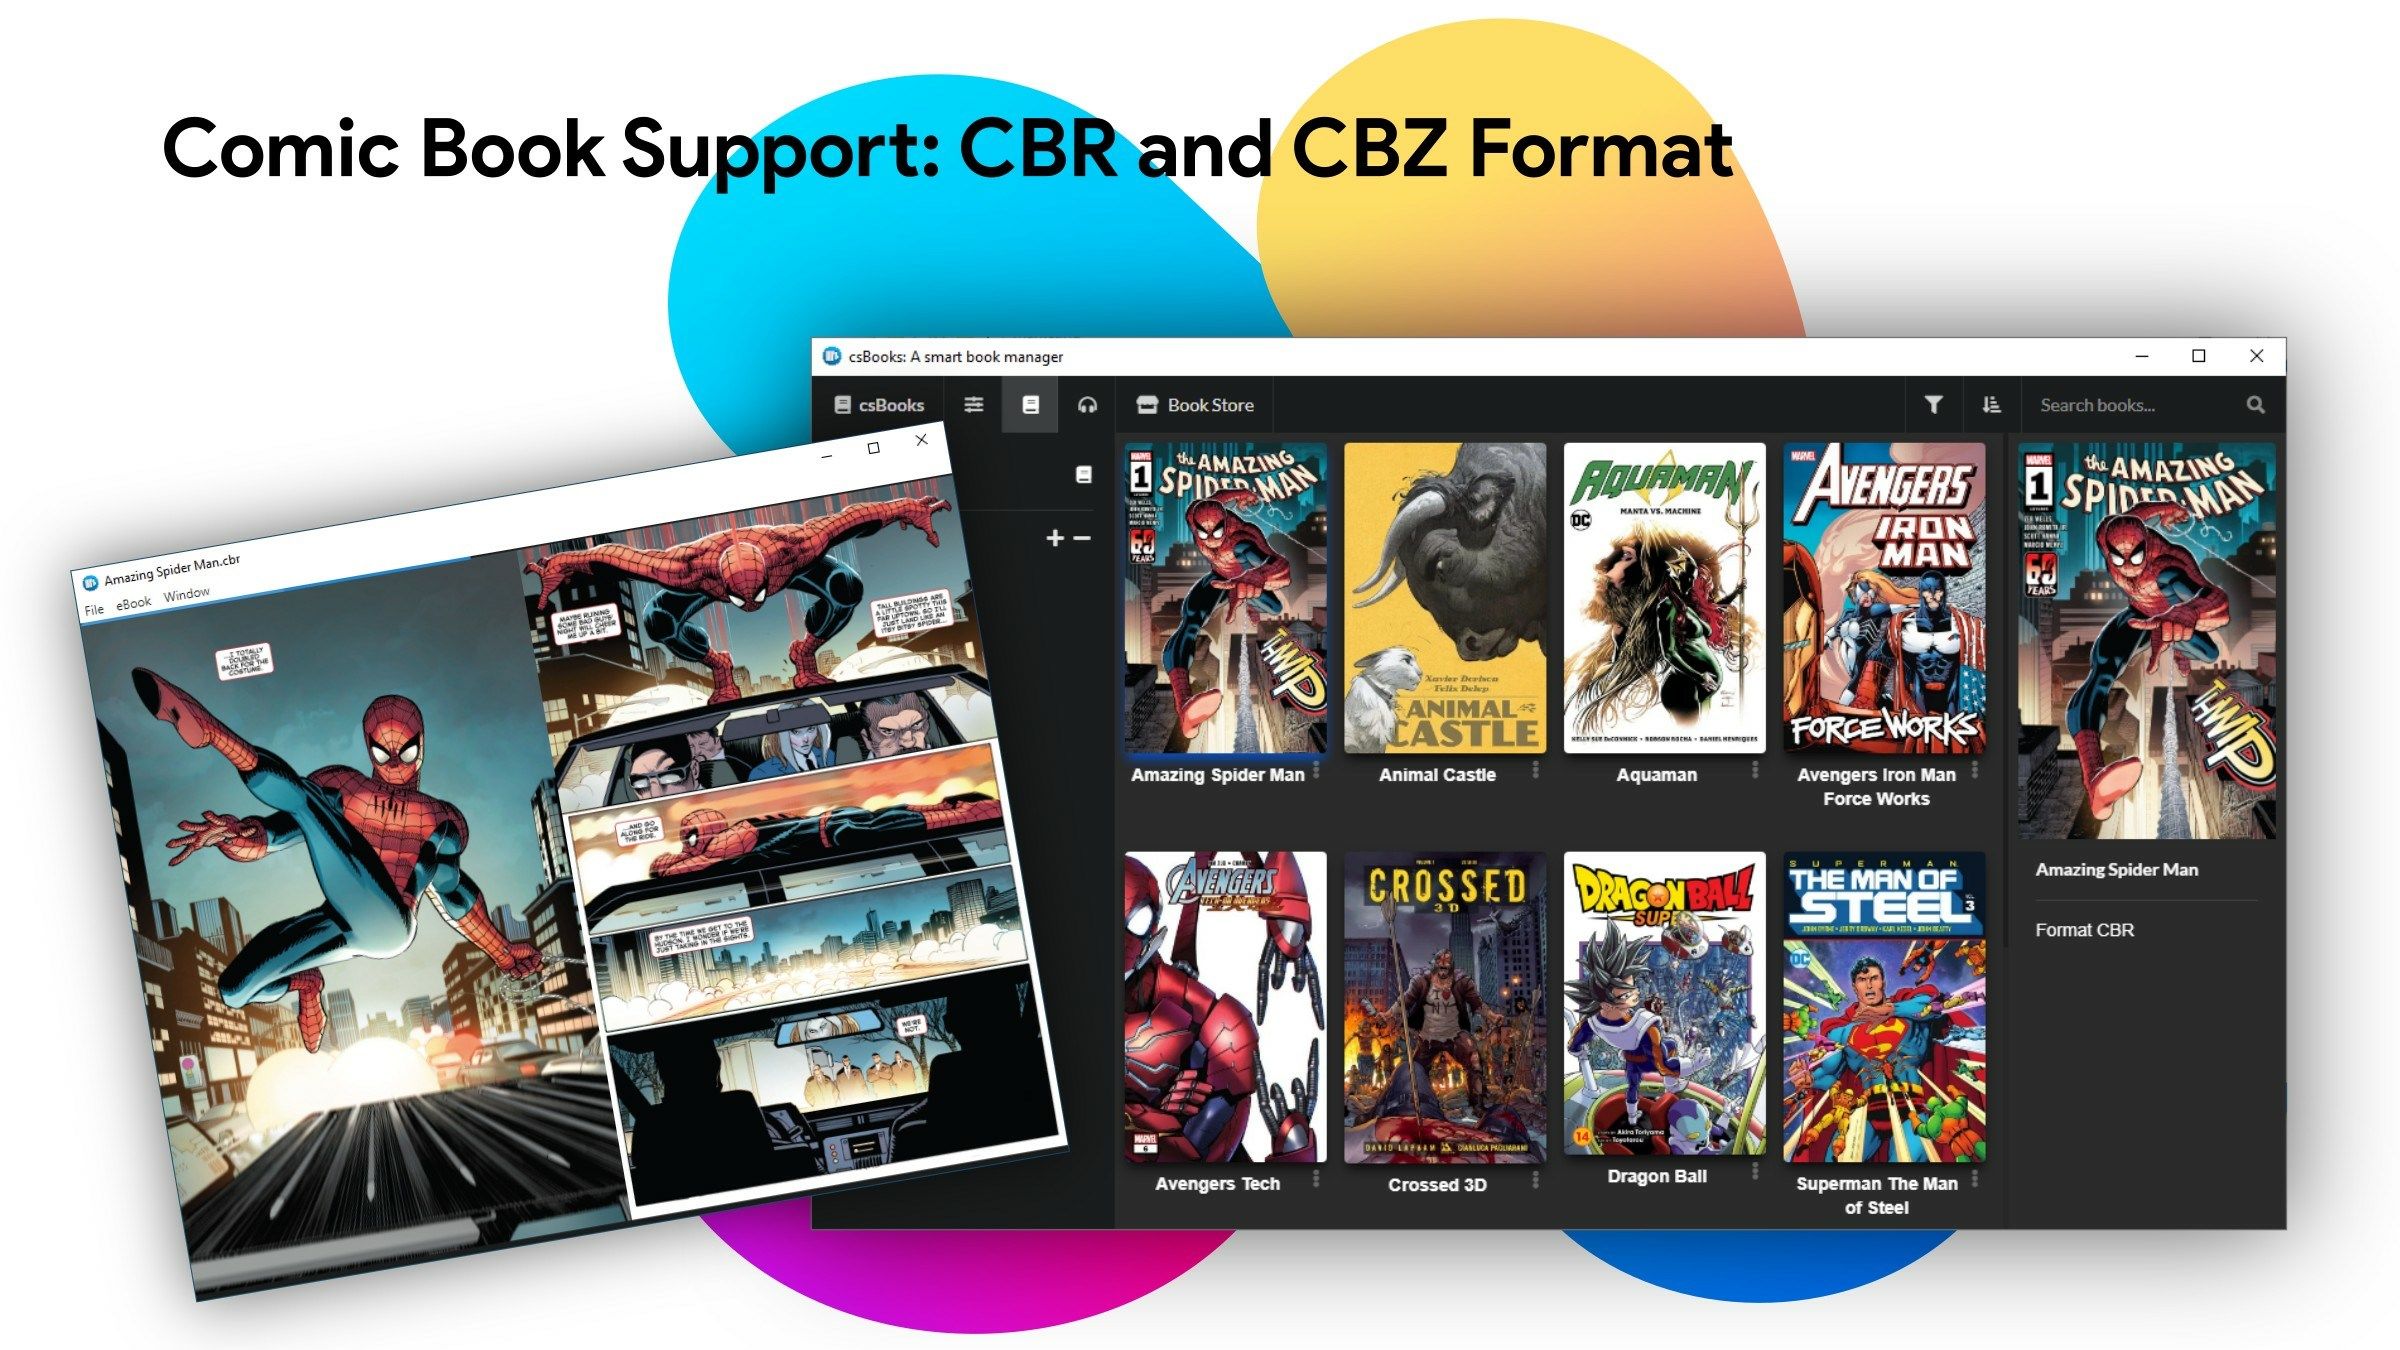 Comic Book Support